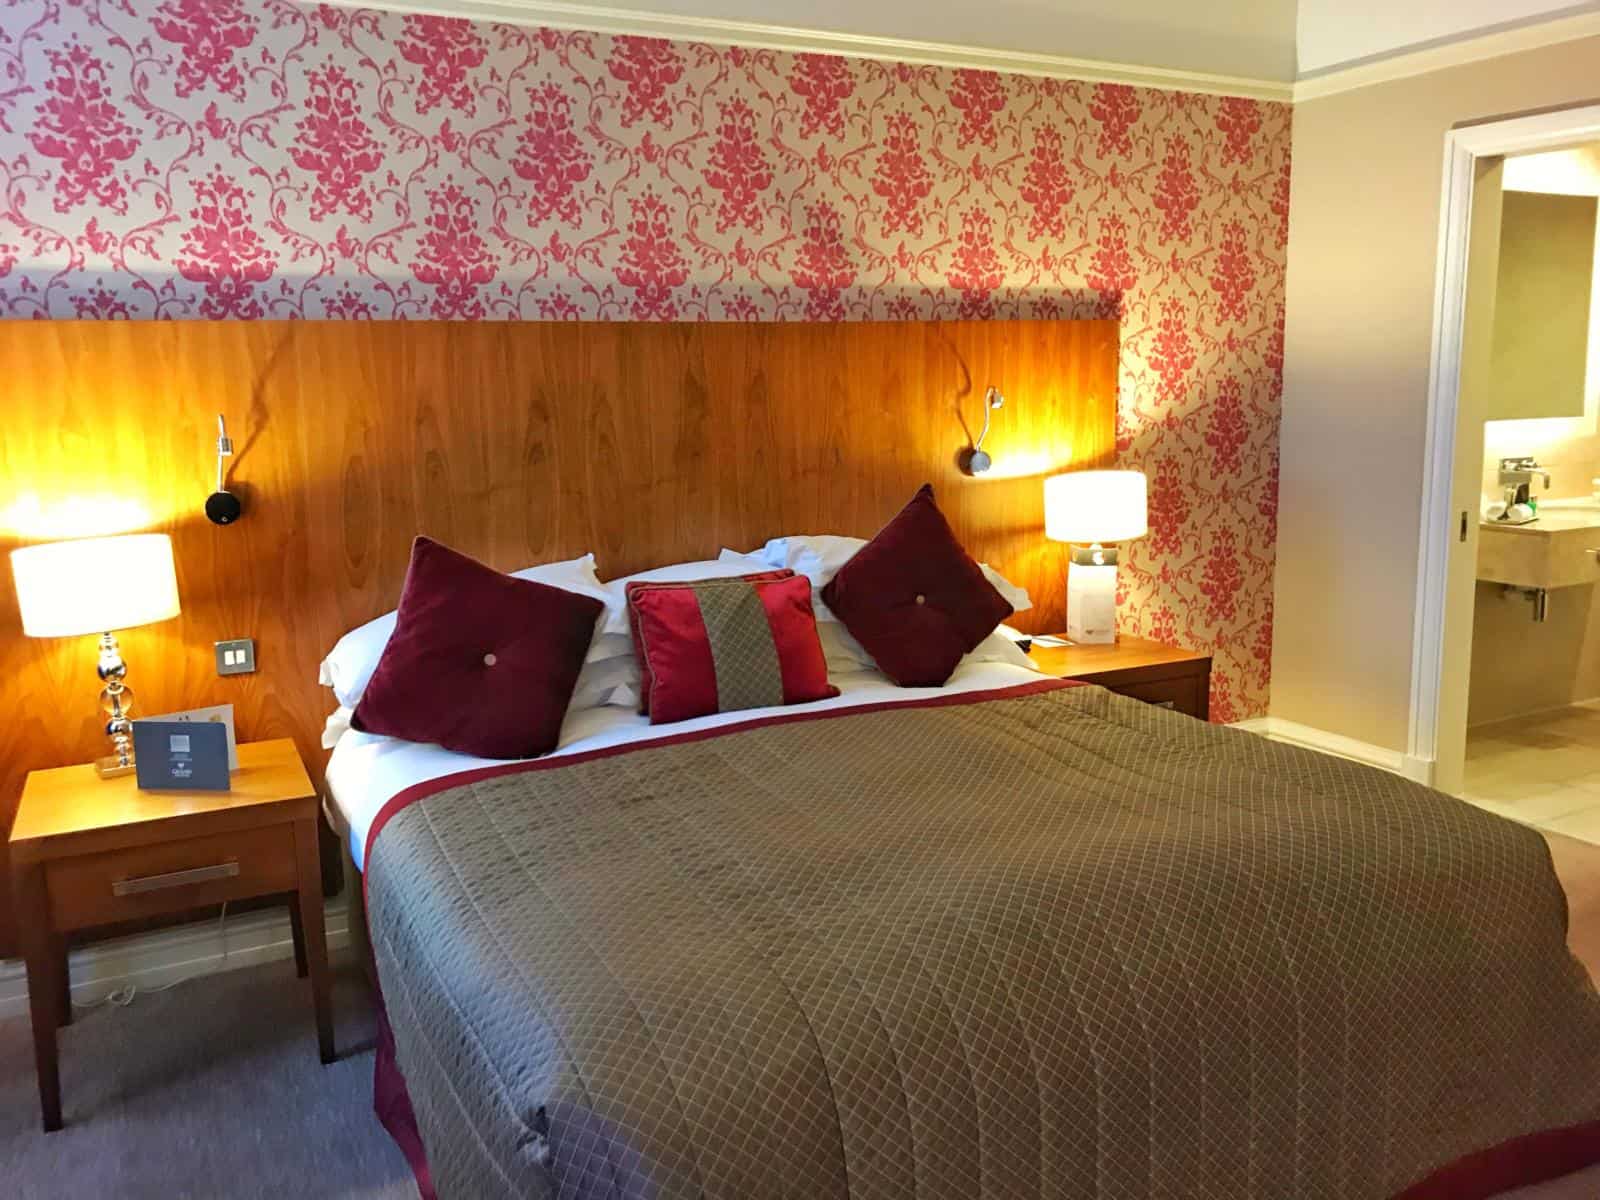 Family friendly Review: The Grand Hotel and Spa York